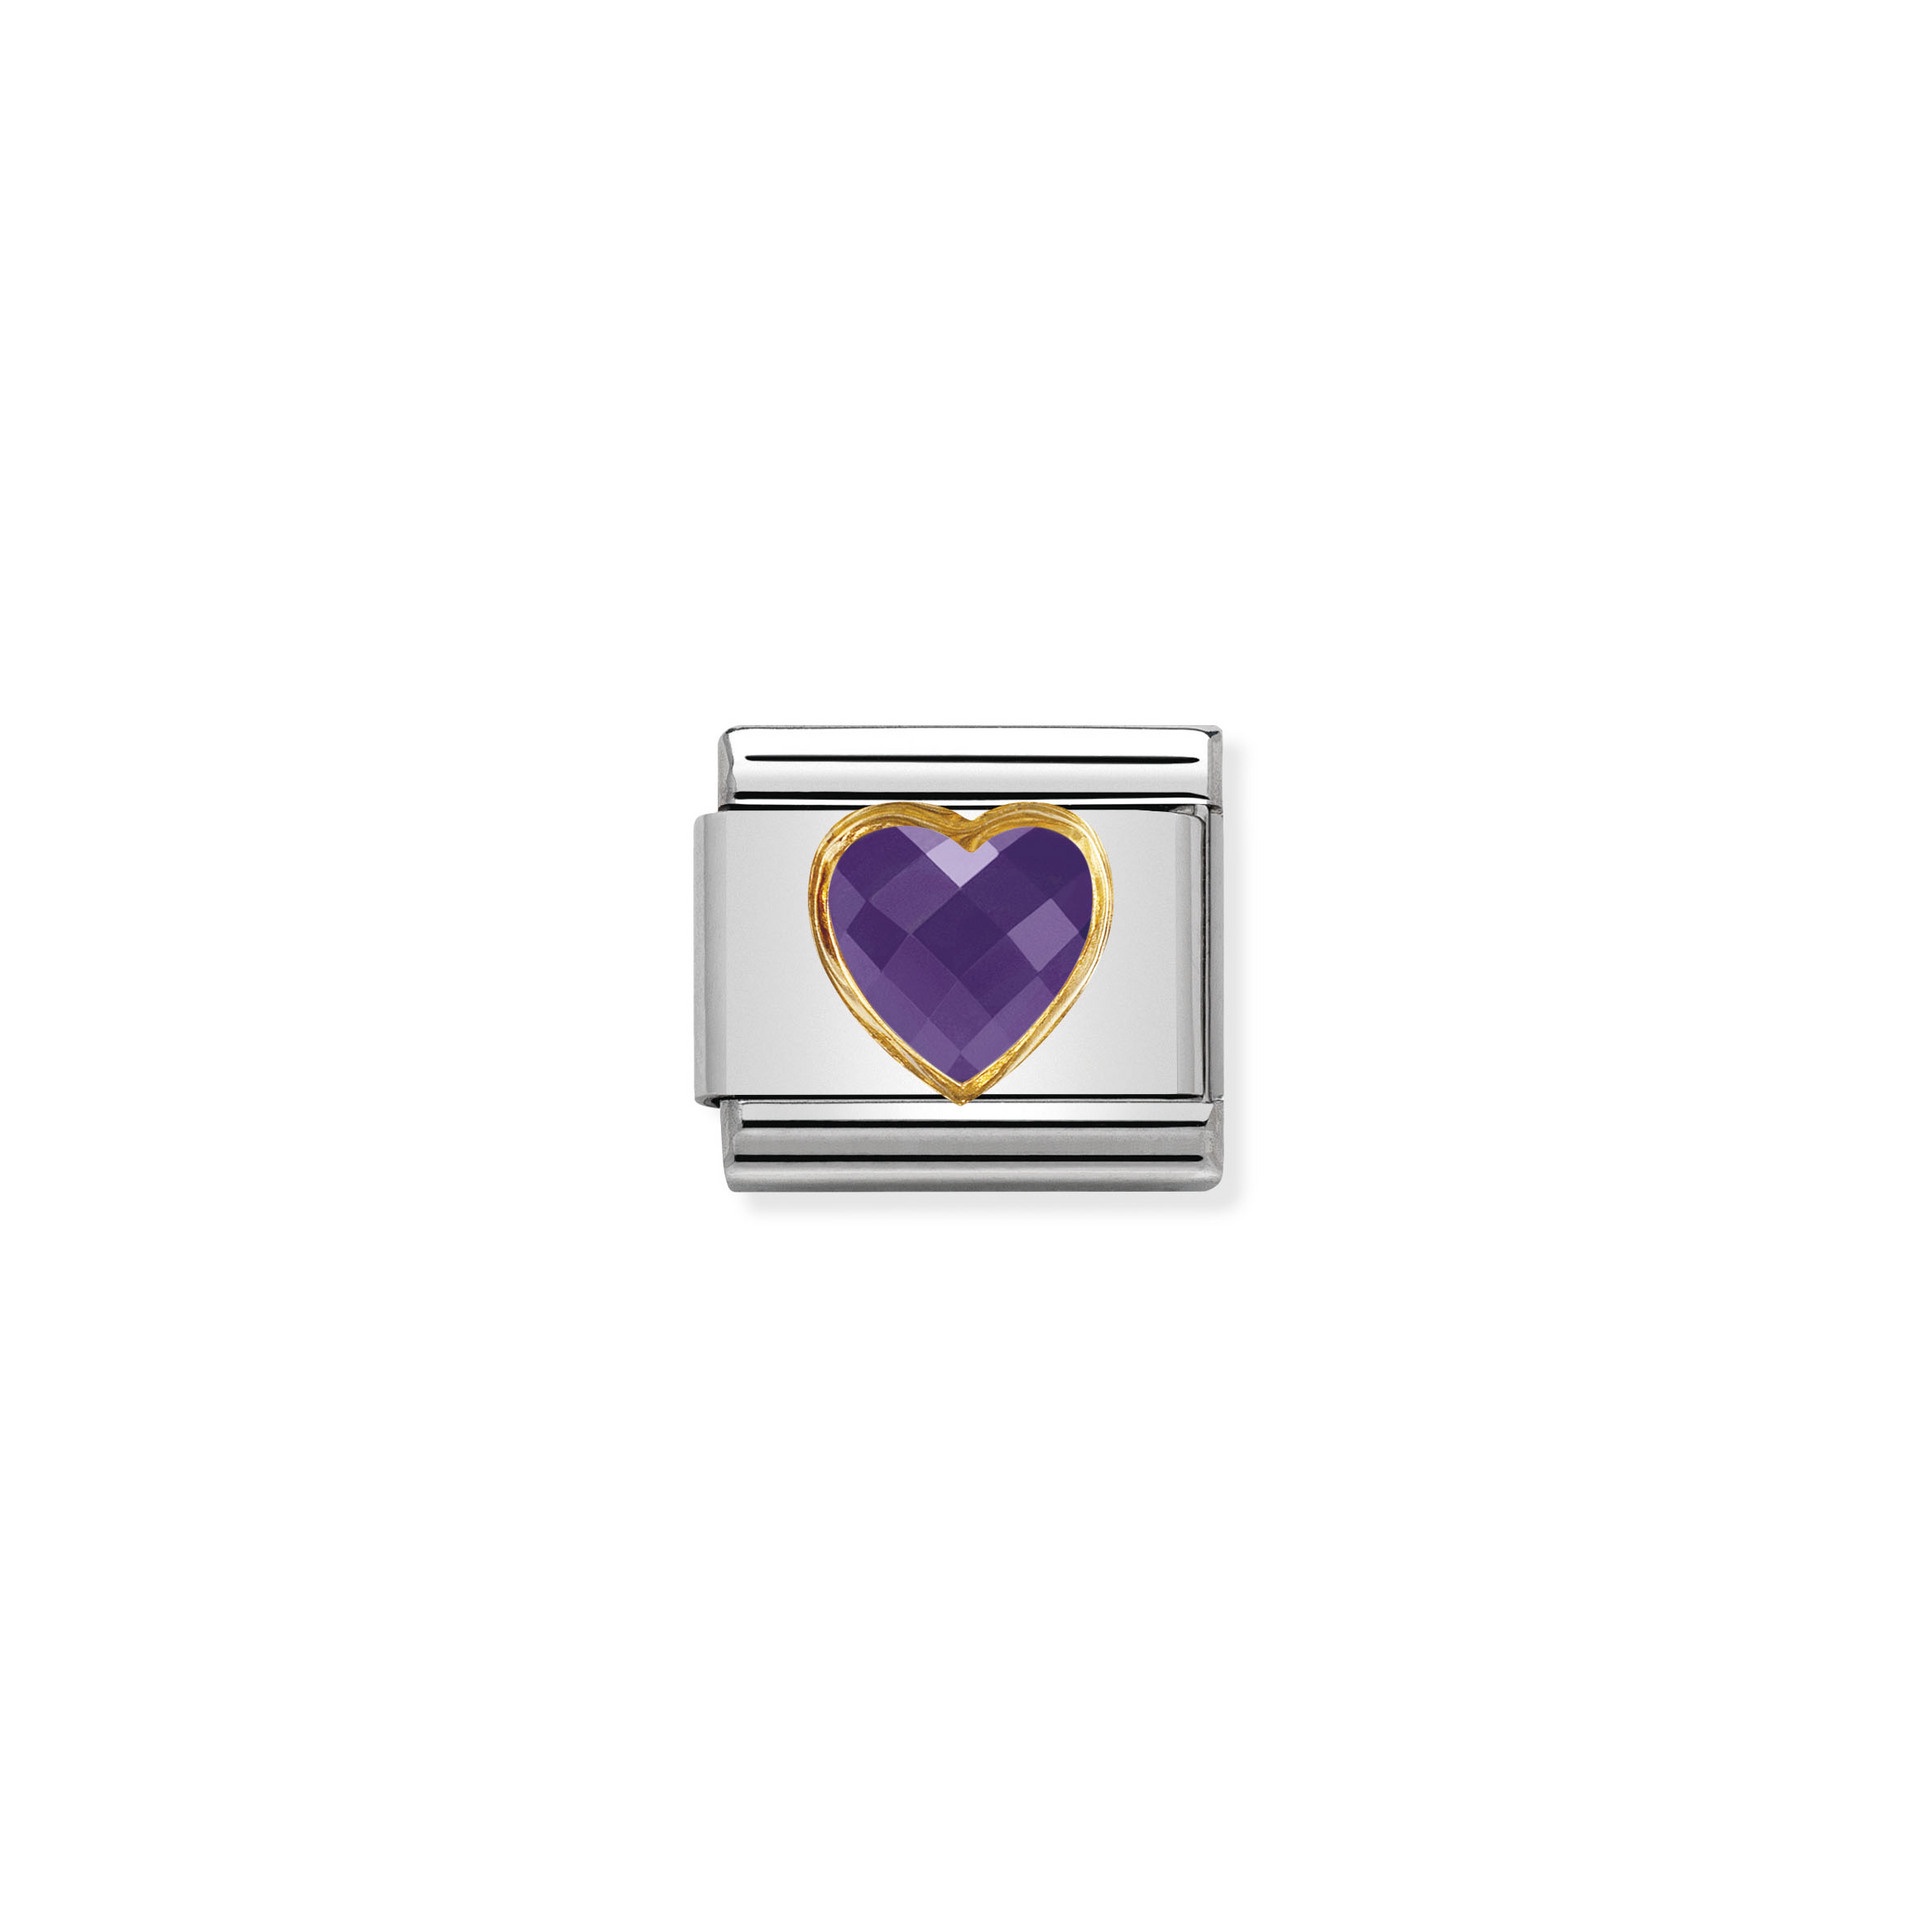 Nomination Composable Classic Multifaceted violet heart link charm - 030610_001